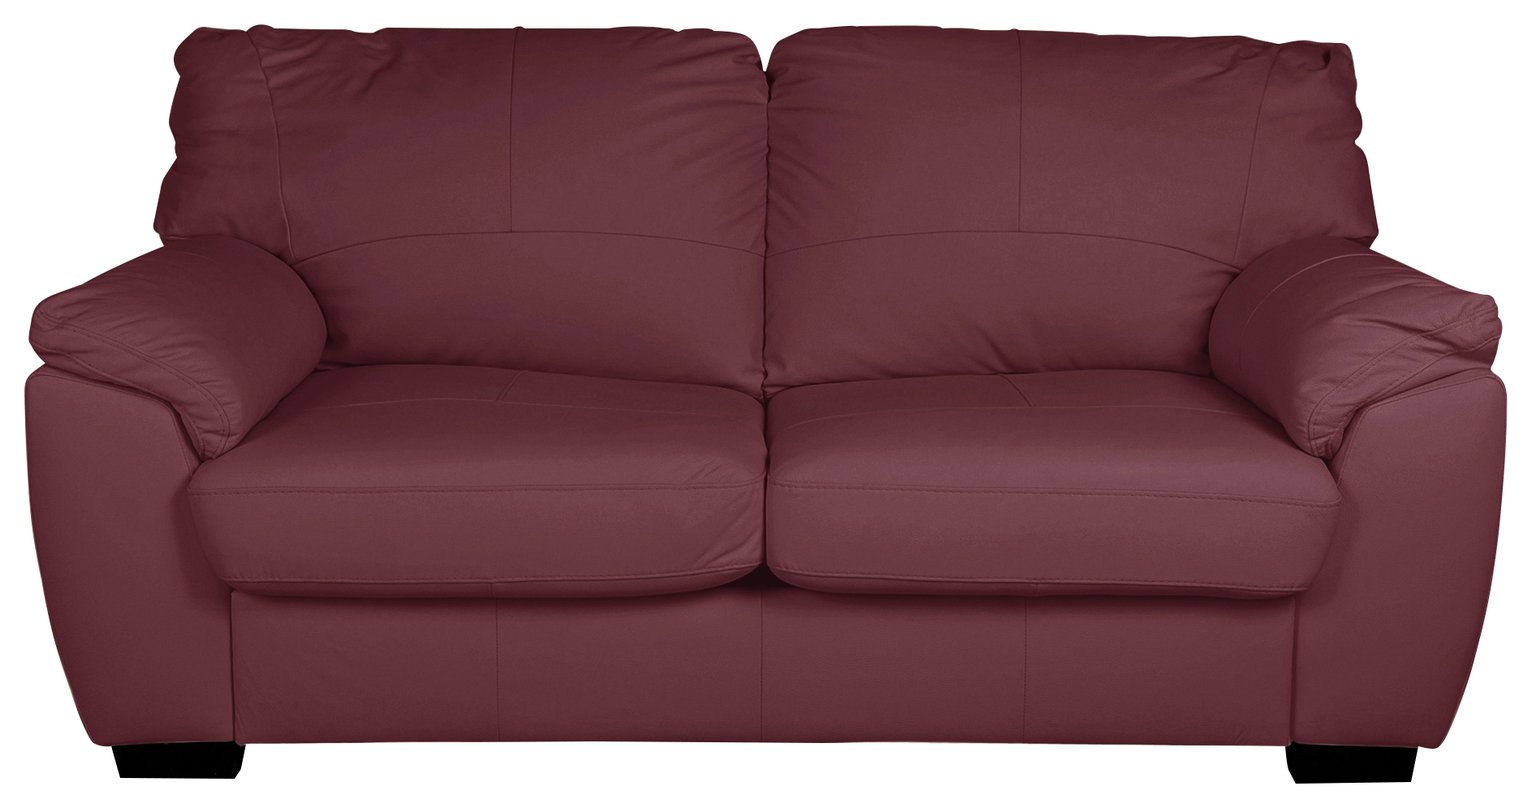 burgundy sofa bed for sale